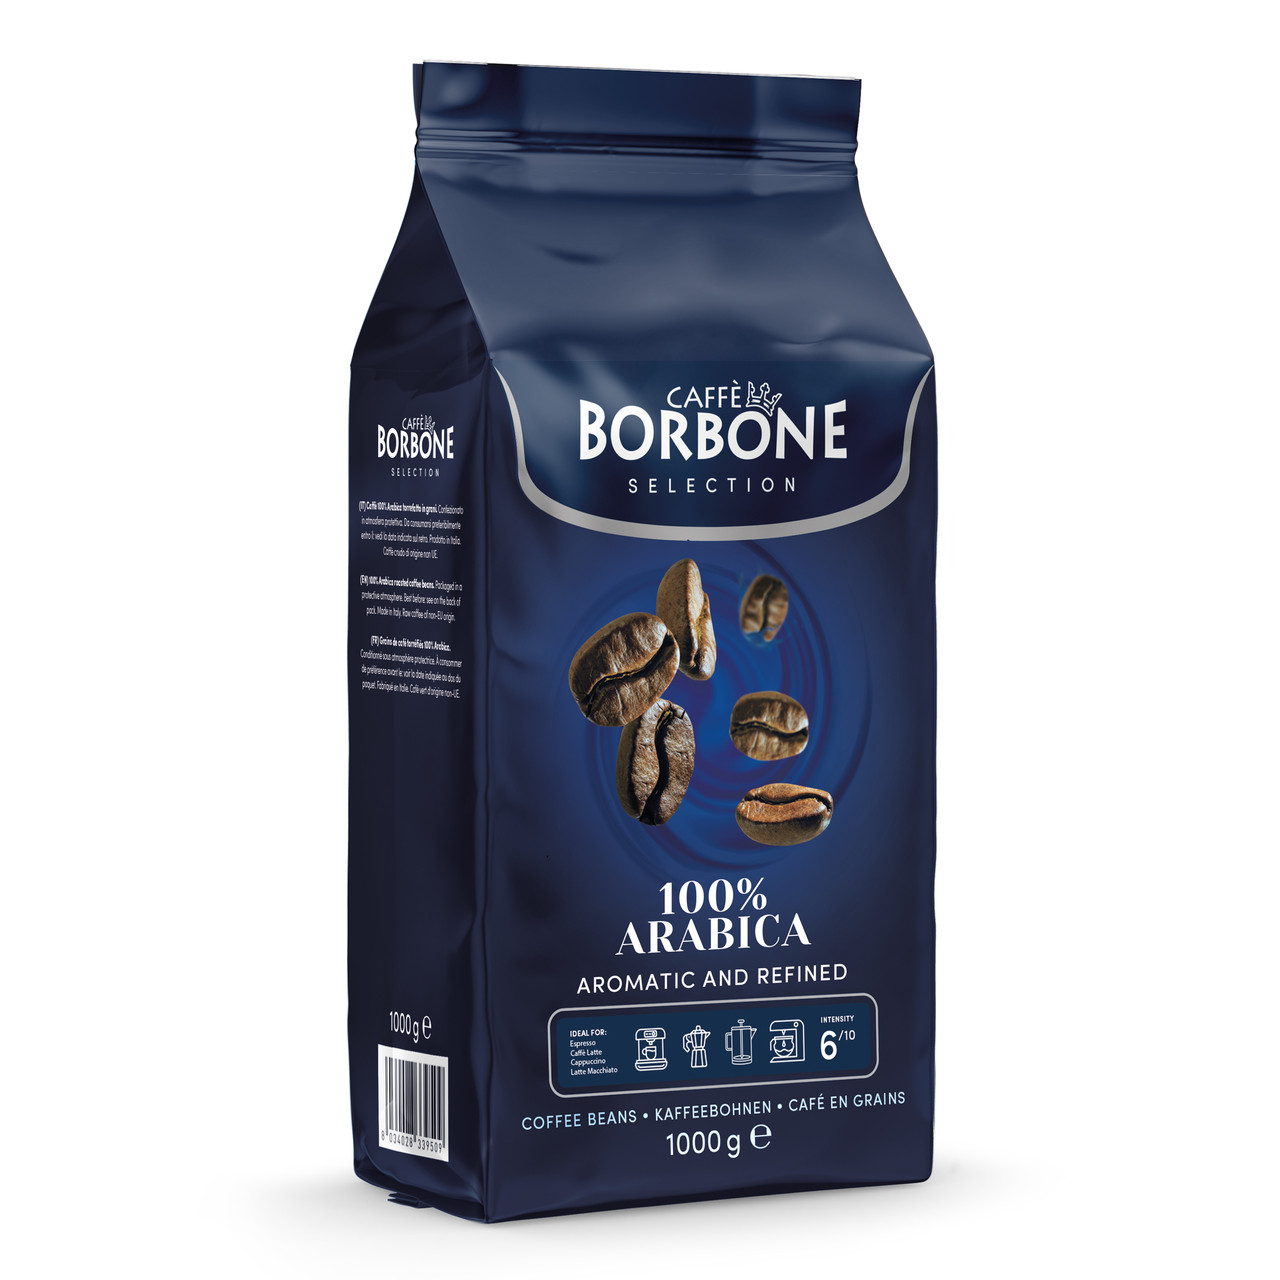 Caffe Borbone Palazzo Nobile Whole Coffee Beans - 2 x 1 kg - Exquisite  Italian Coffee Elegance